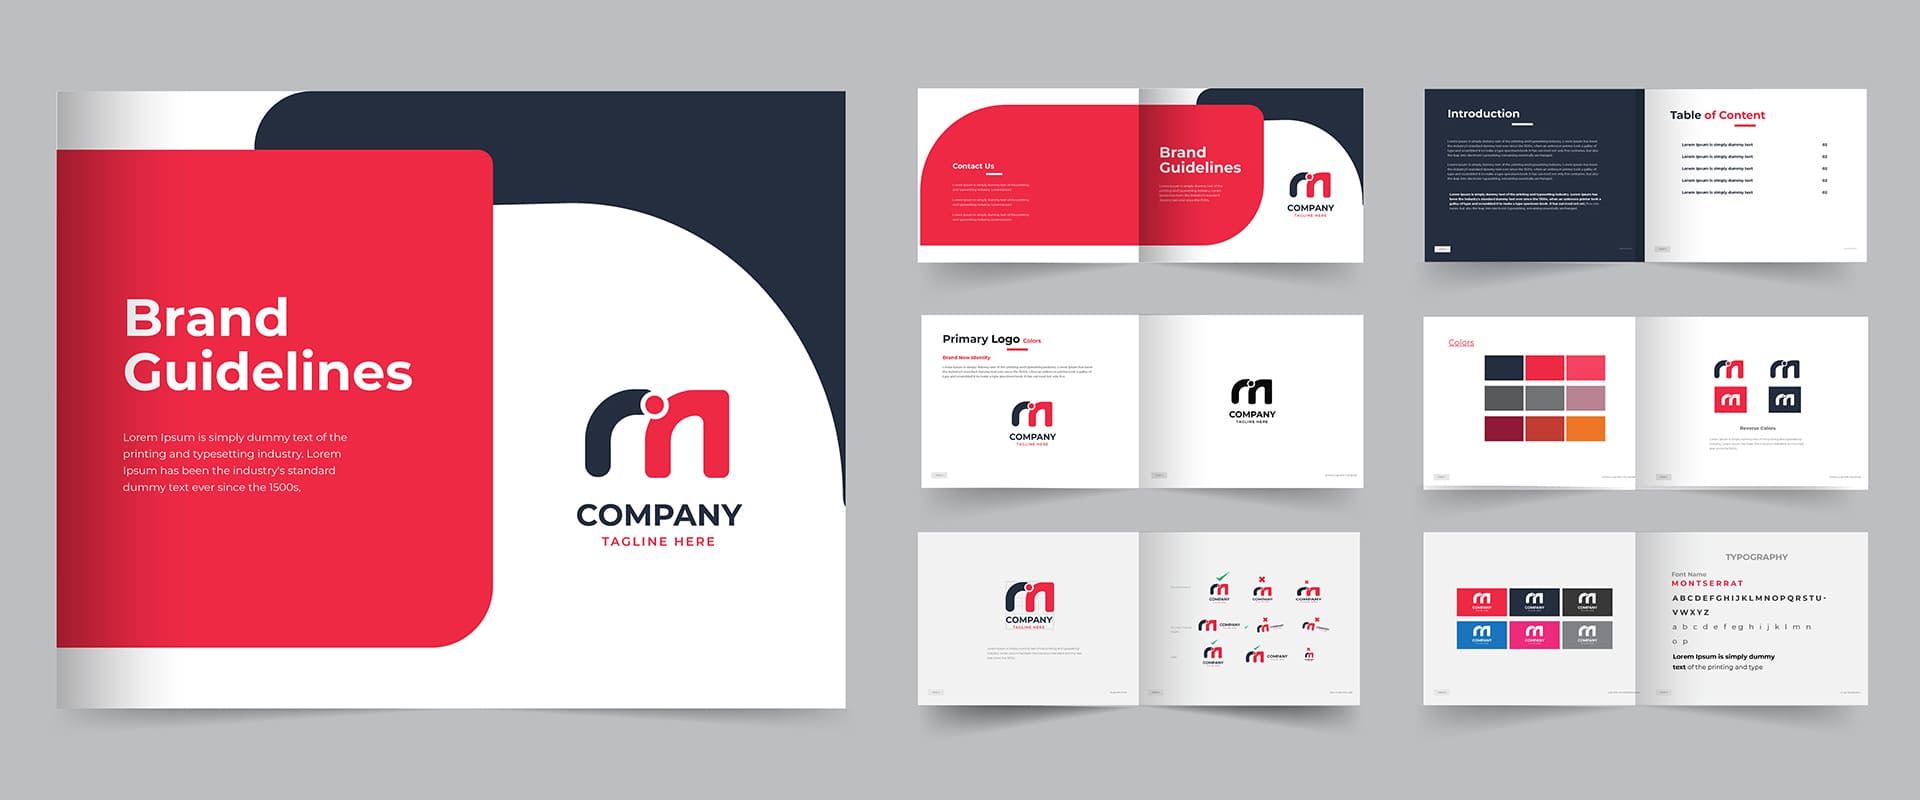 brand-guidelines-example-01-min